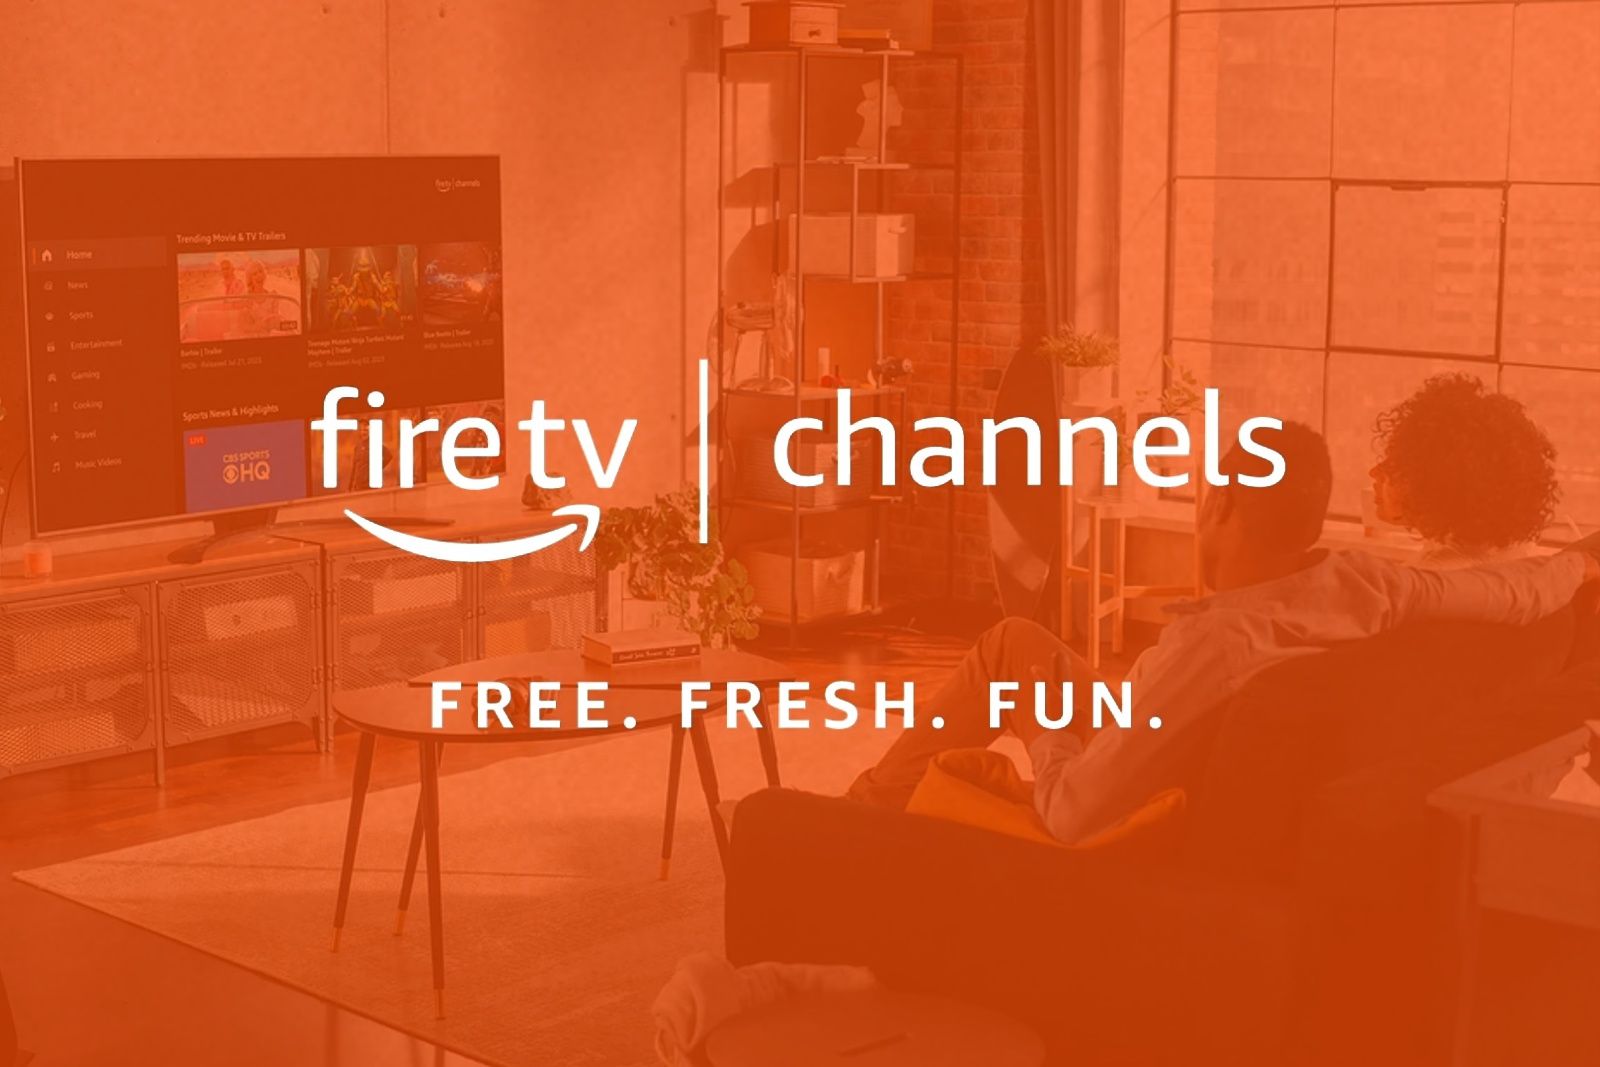 What is the Fire TV Channels app, how do I get it and what does it offer?